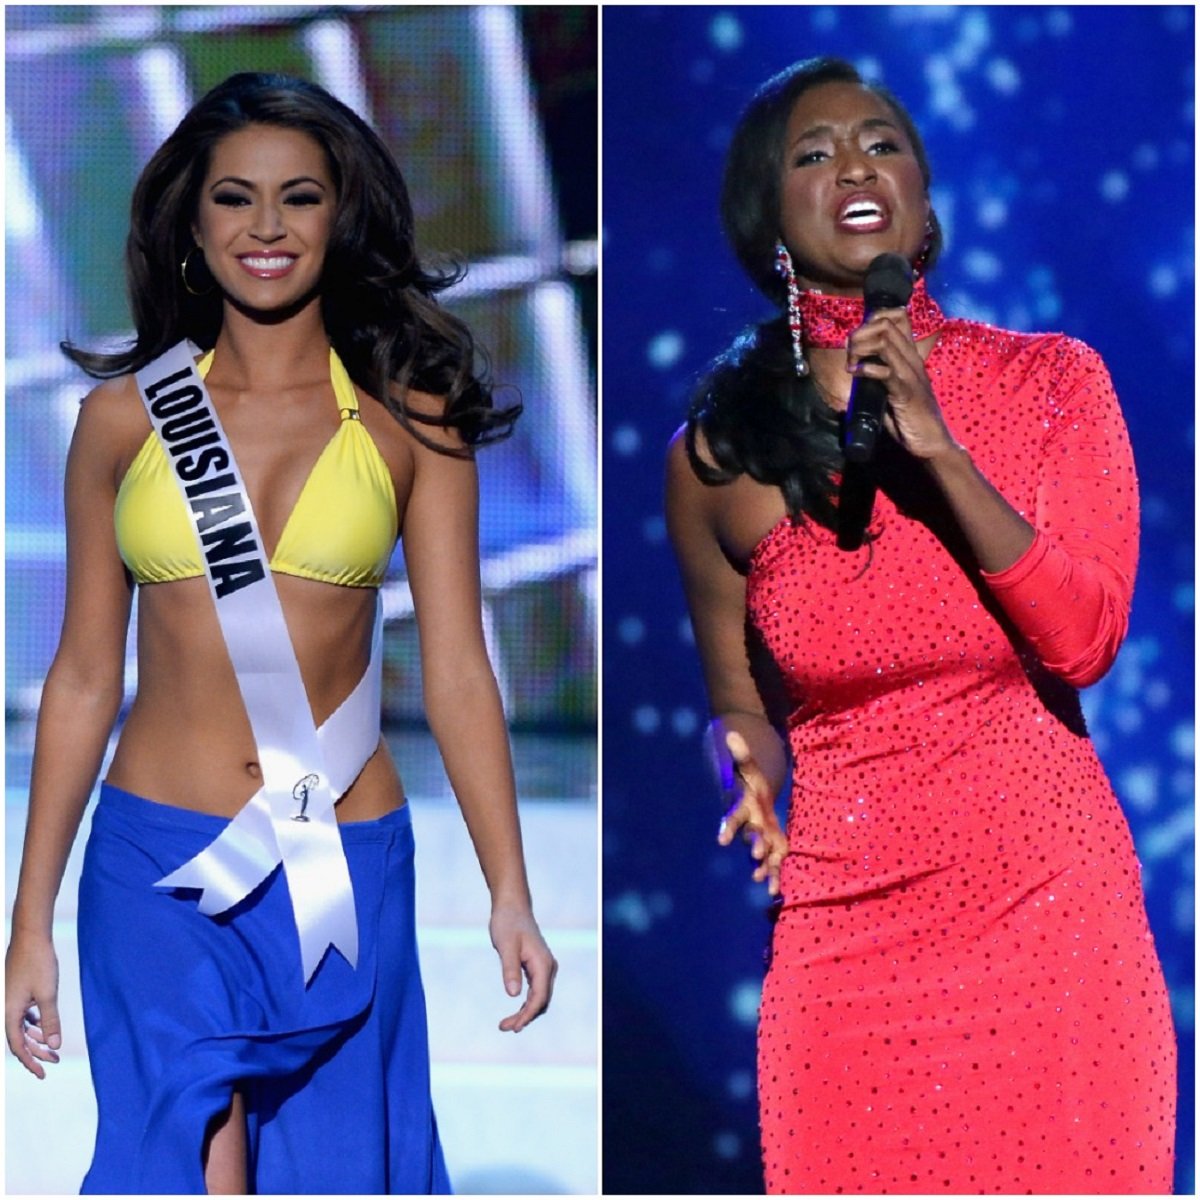 (R): Miss Louisiana 2012 Kristen Girault smiling on stage during the swimsuit competition, (L): Miss District of Columbia 2017 Briana Kinsey participating in Talent showcase during Miss America